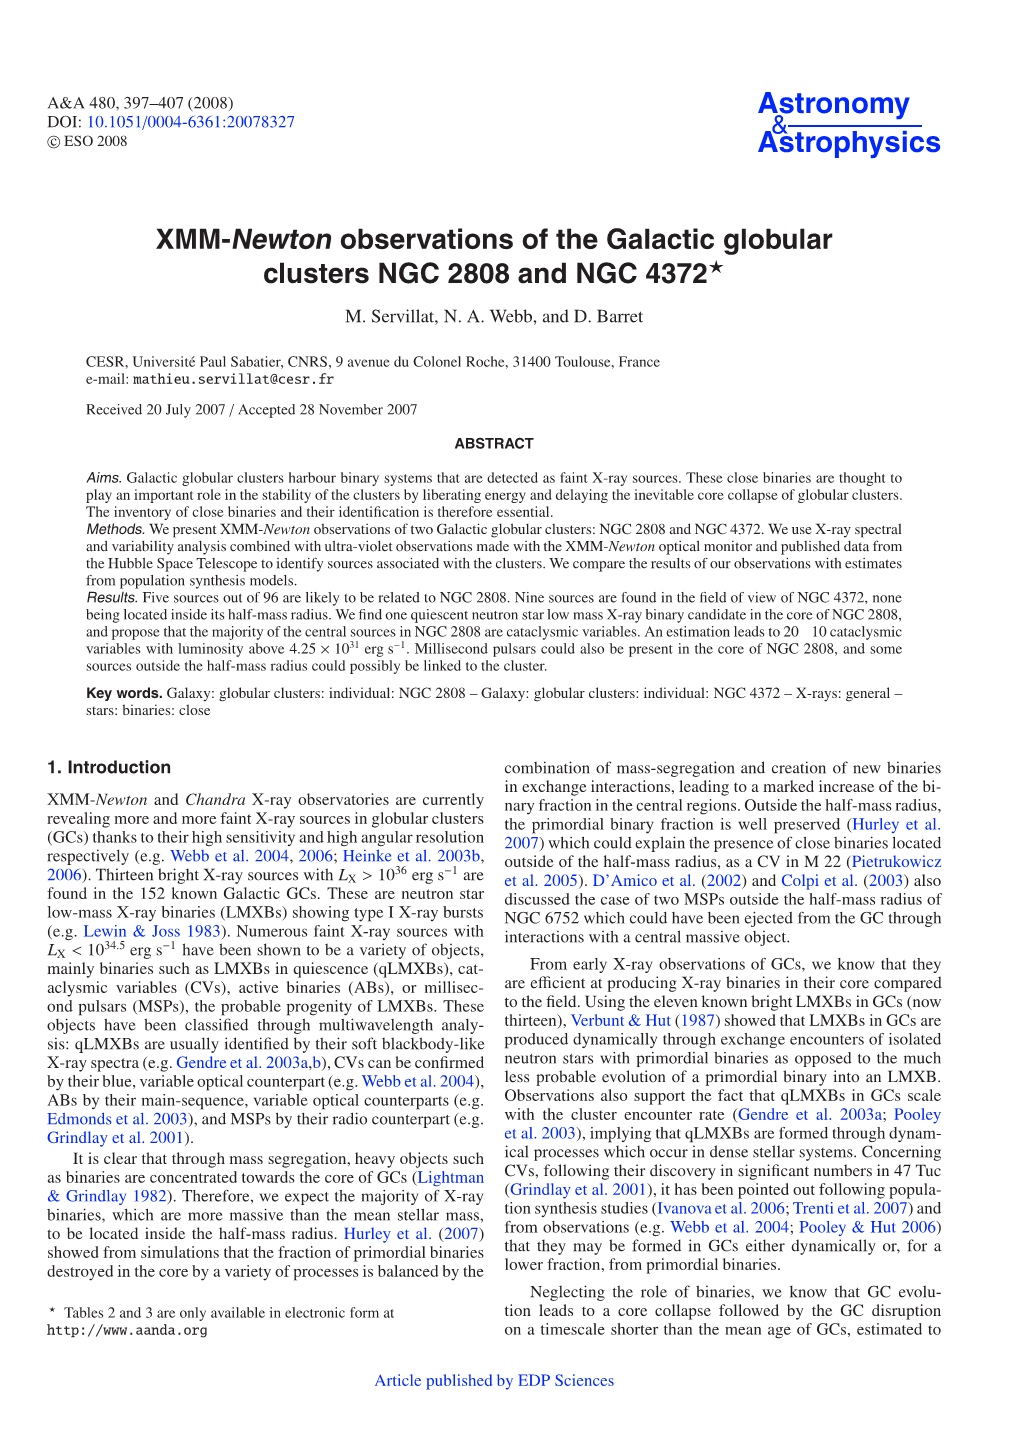 XMM-Newton Observations of the Galactic Globular Clusters NGC 2808 and NGC 4372